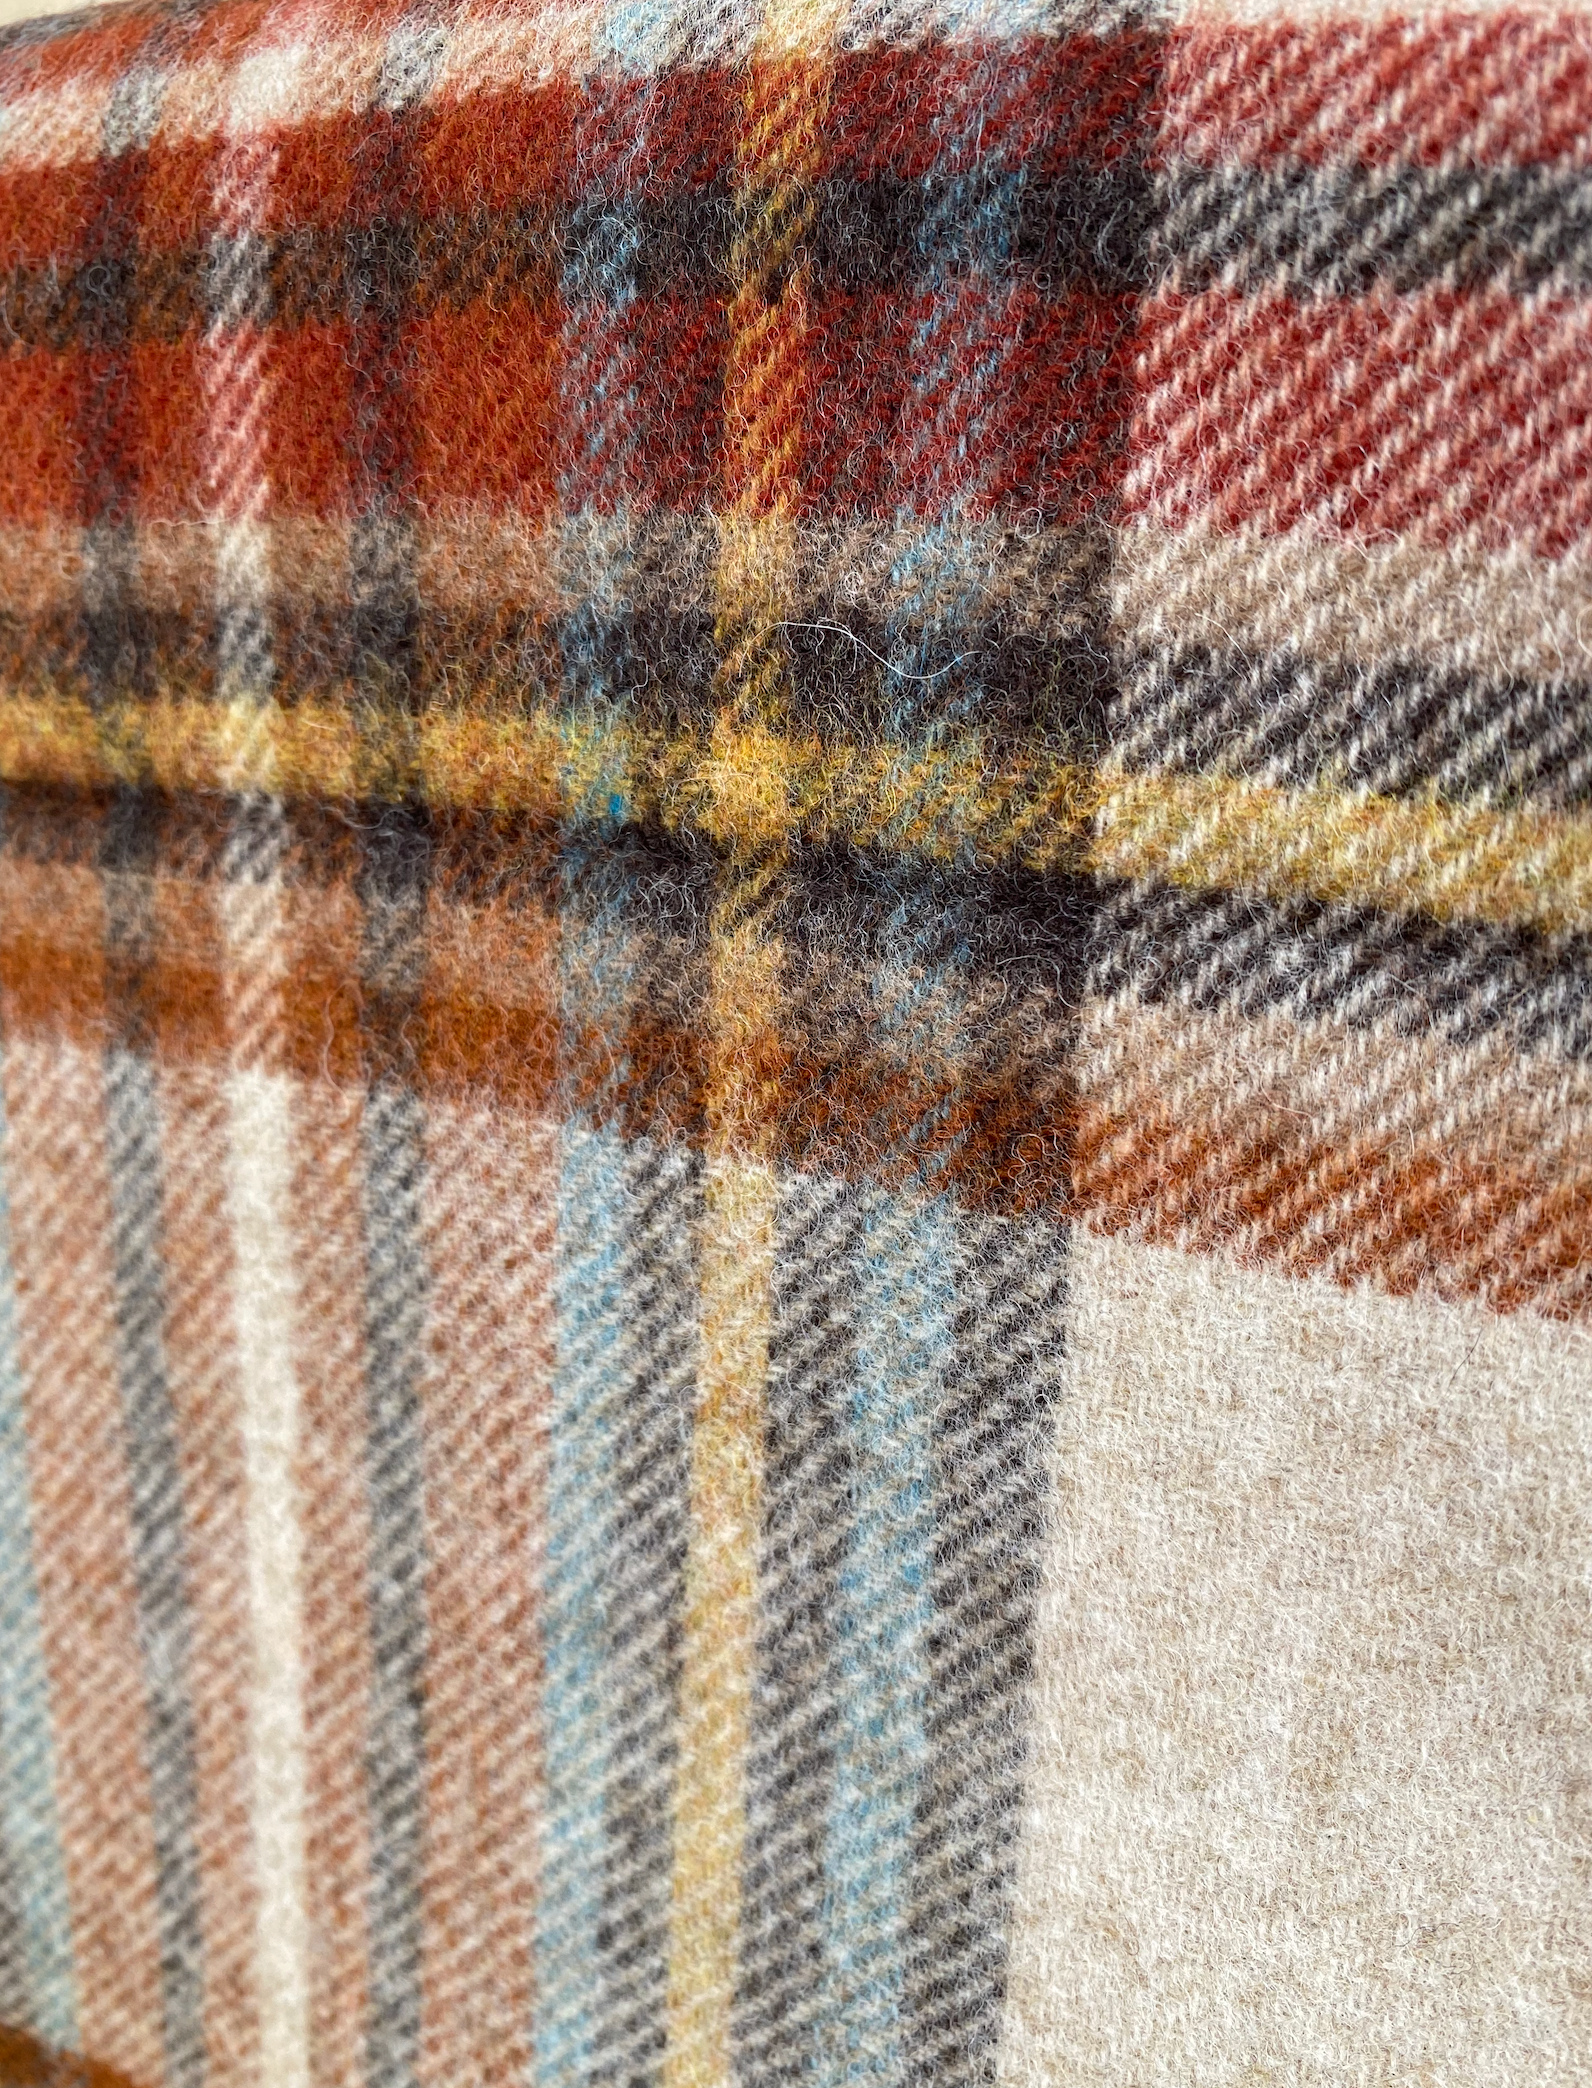 Merino Wool Scarf - Biscuit marl with Rust Orange Check